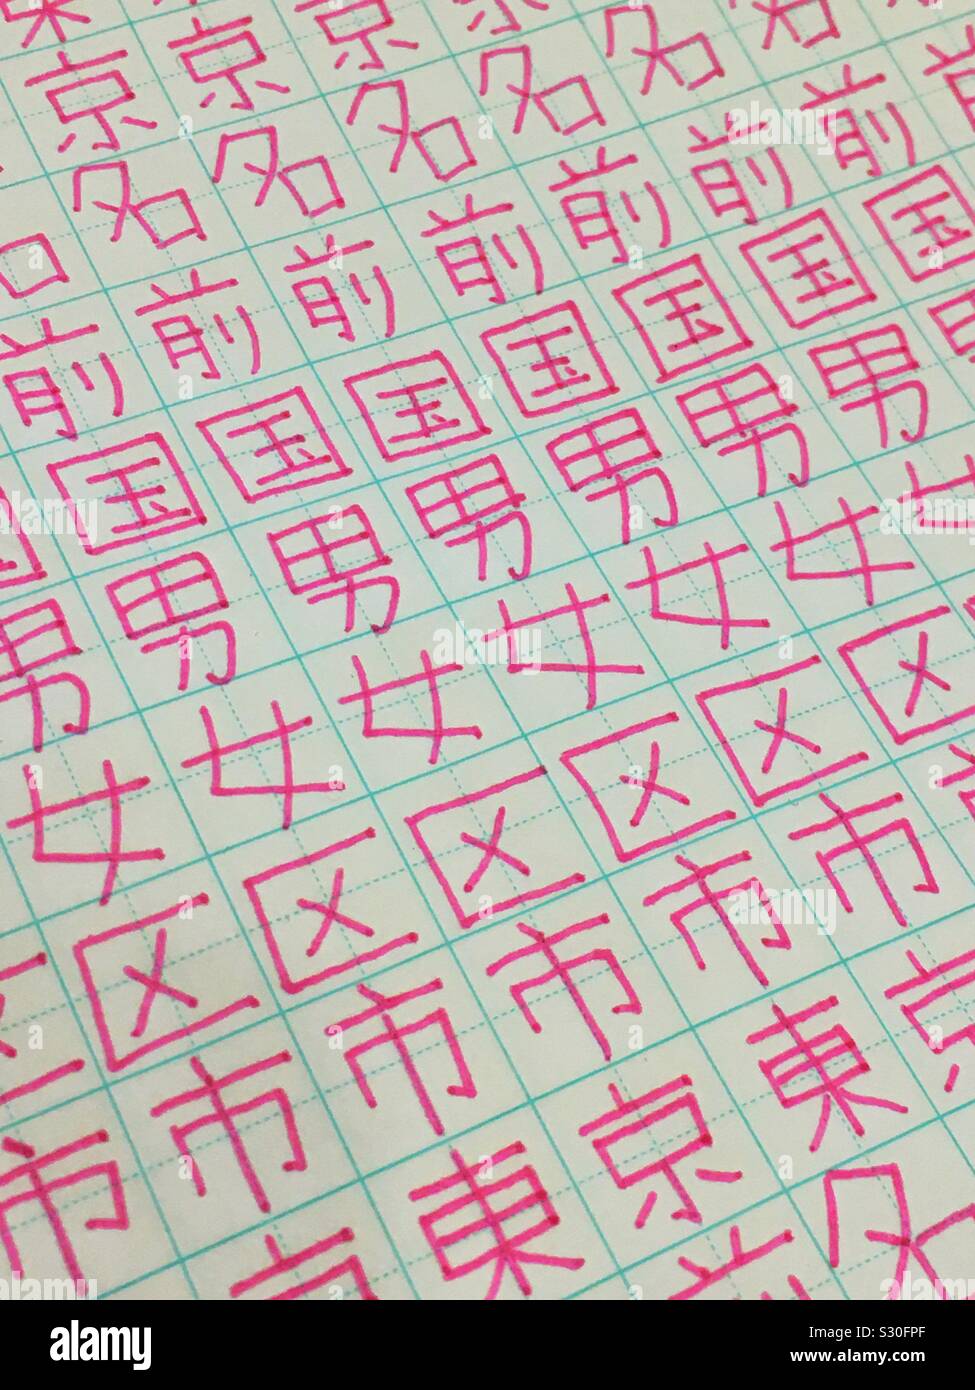 Writing practice of Japanese KANJI characters in pink pen by a non-japanese person Stock Photo